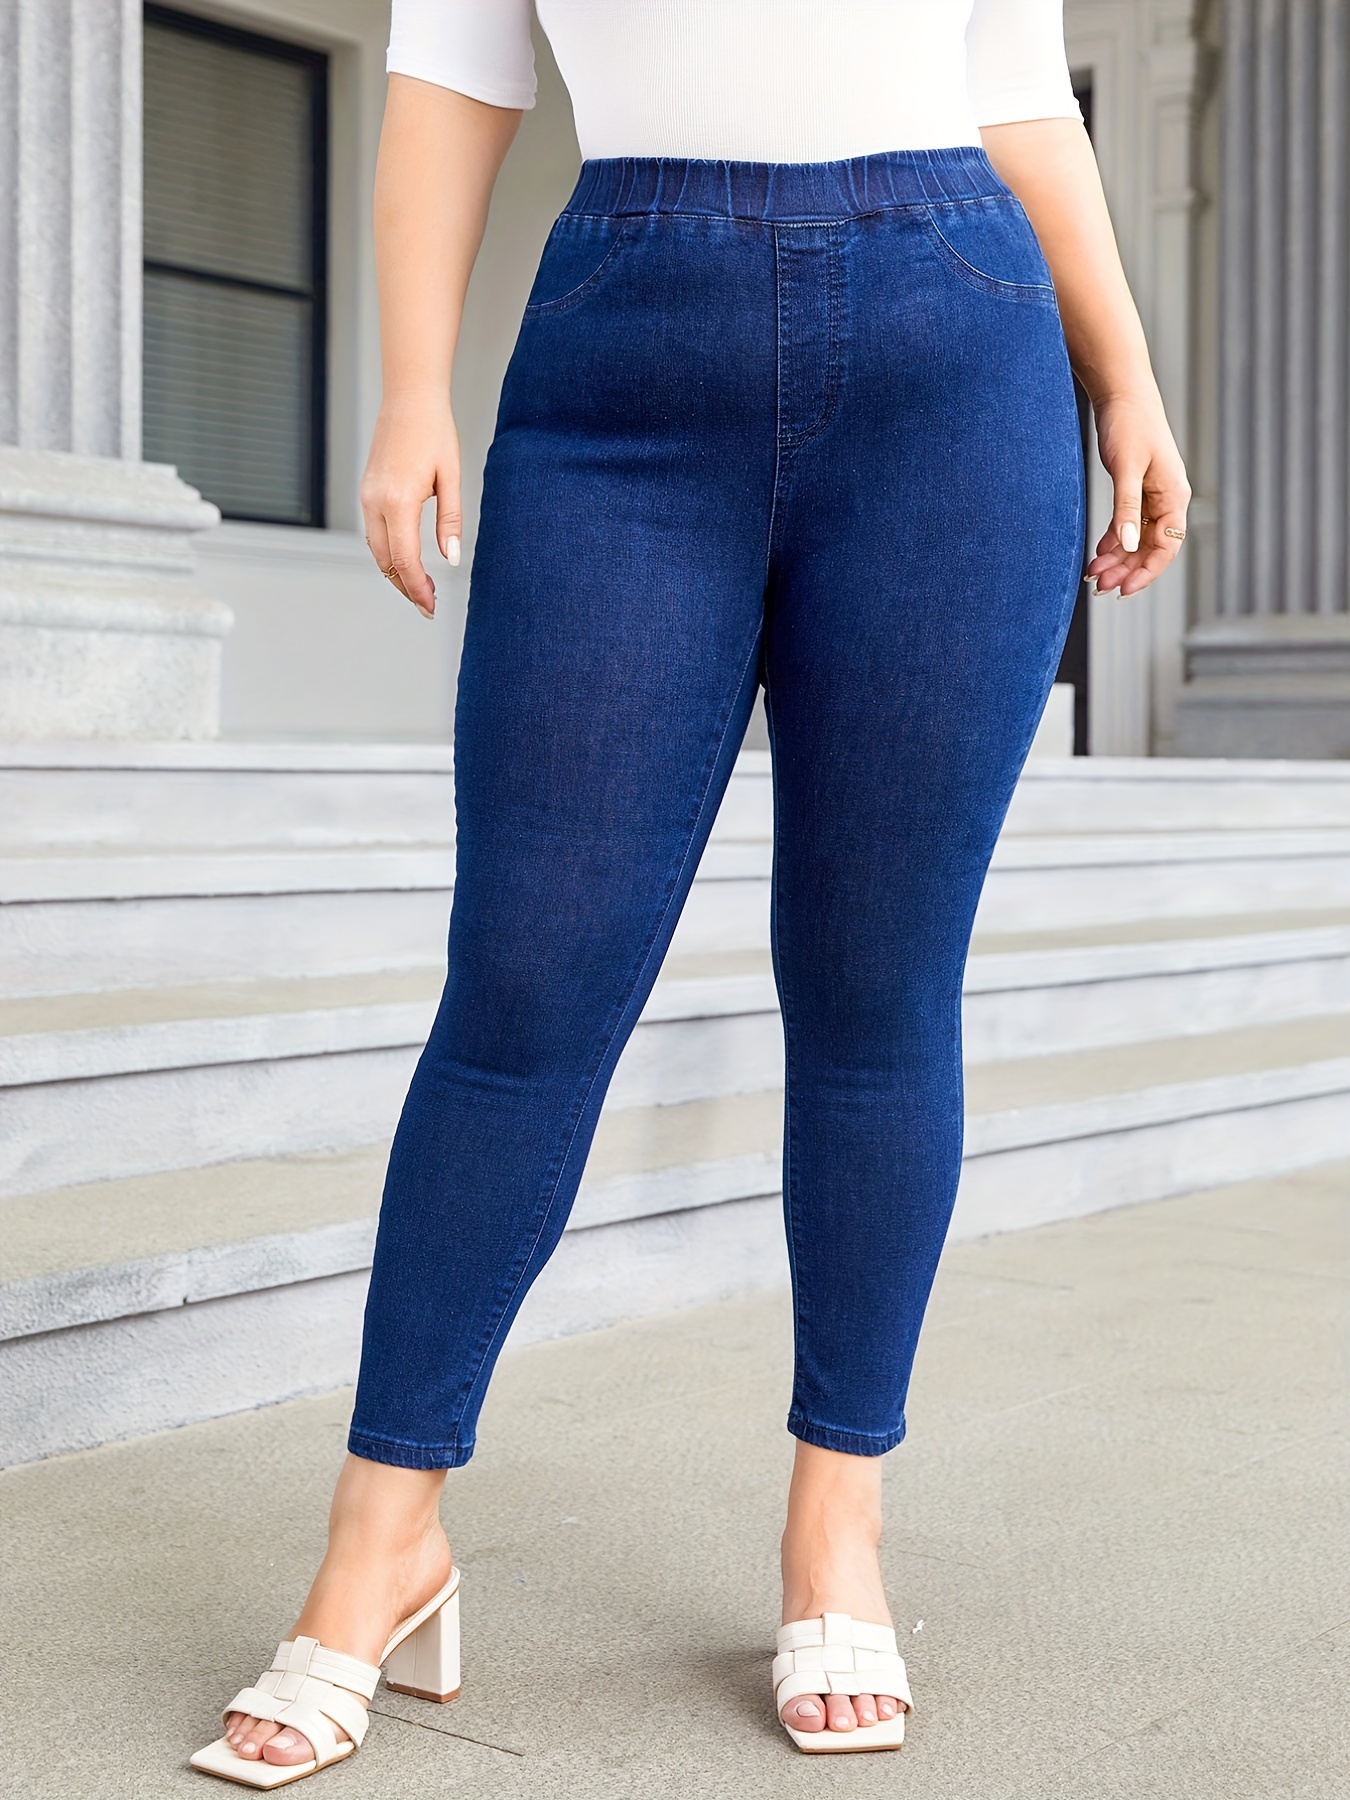 Plus Size Basic Jeans, Women's Plus Elastic Waist Solid High Stretch Skinny  Jeans